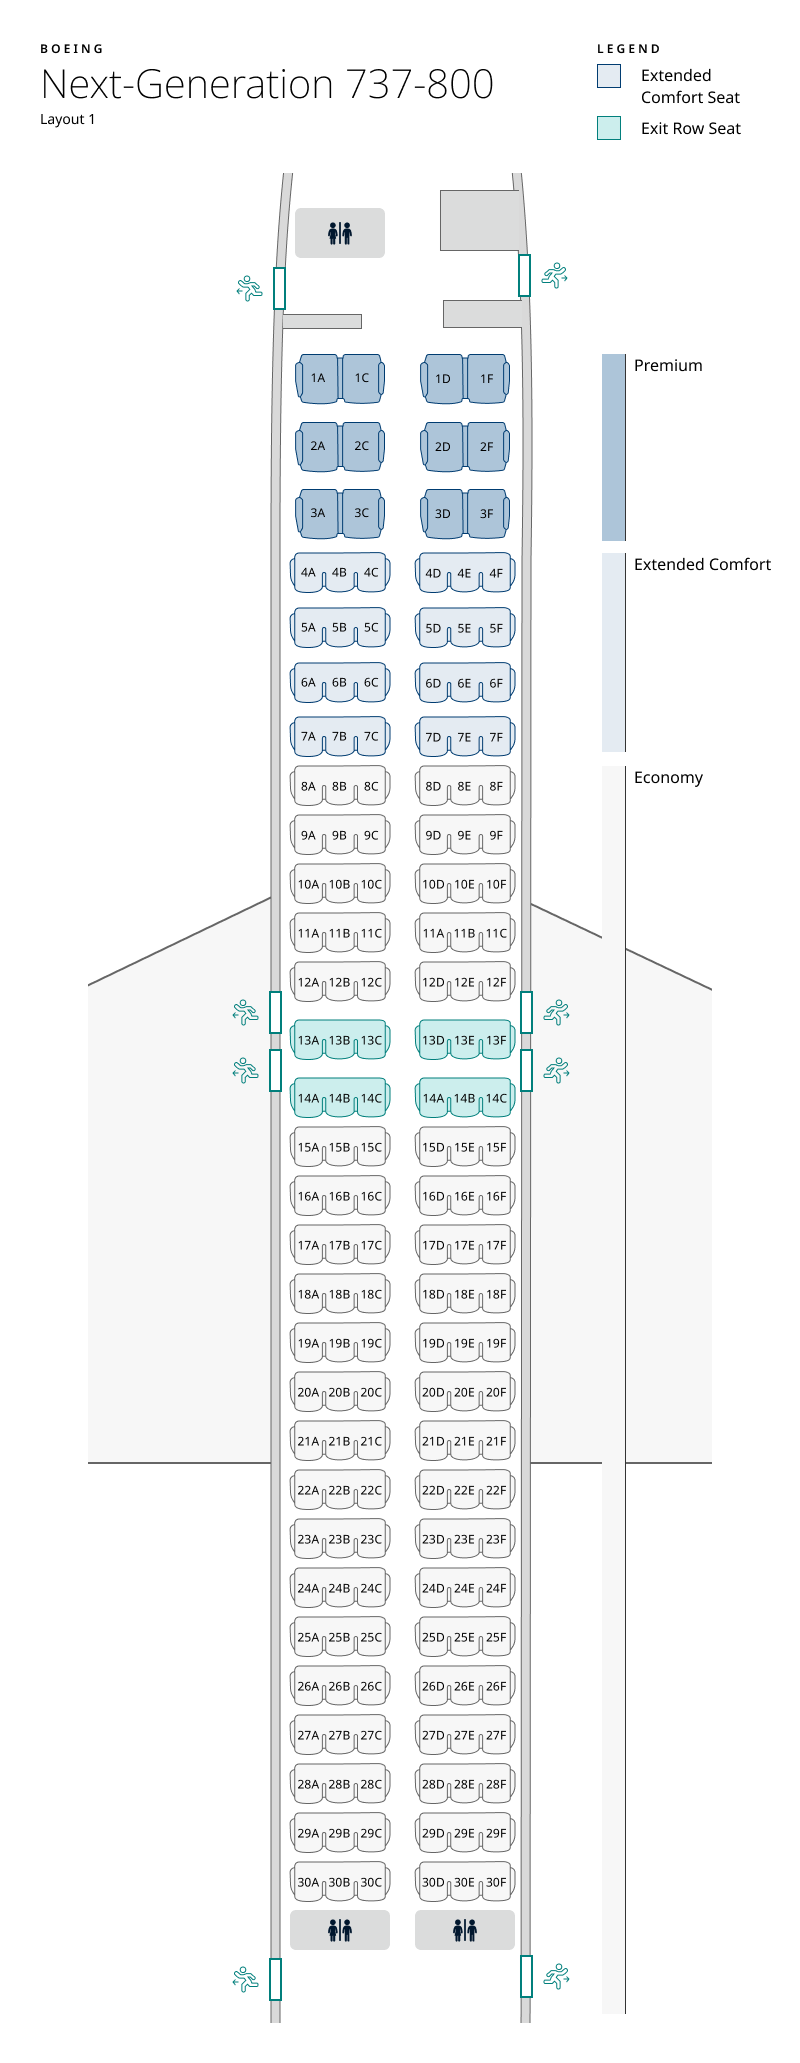 Seat map of 737-800 layout 1. Seat information available in table below